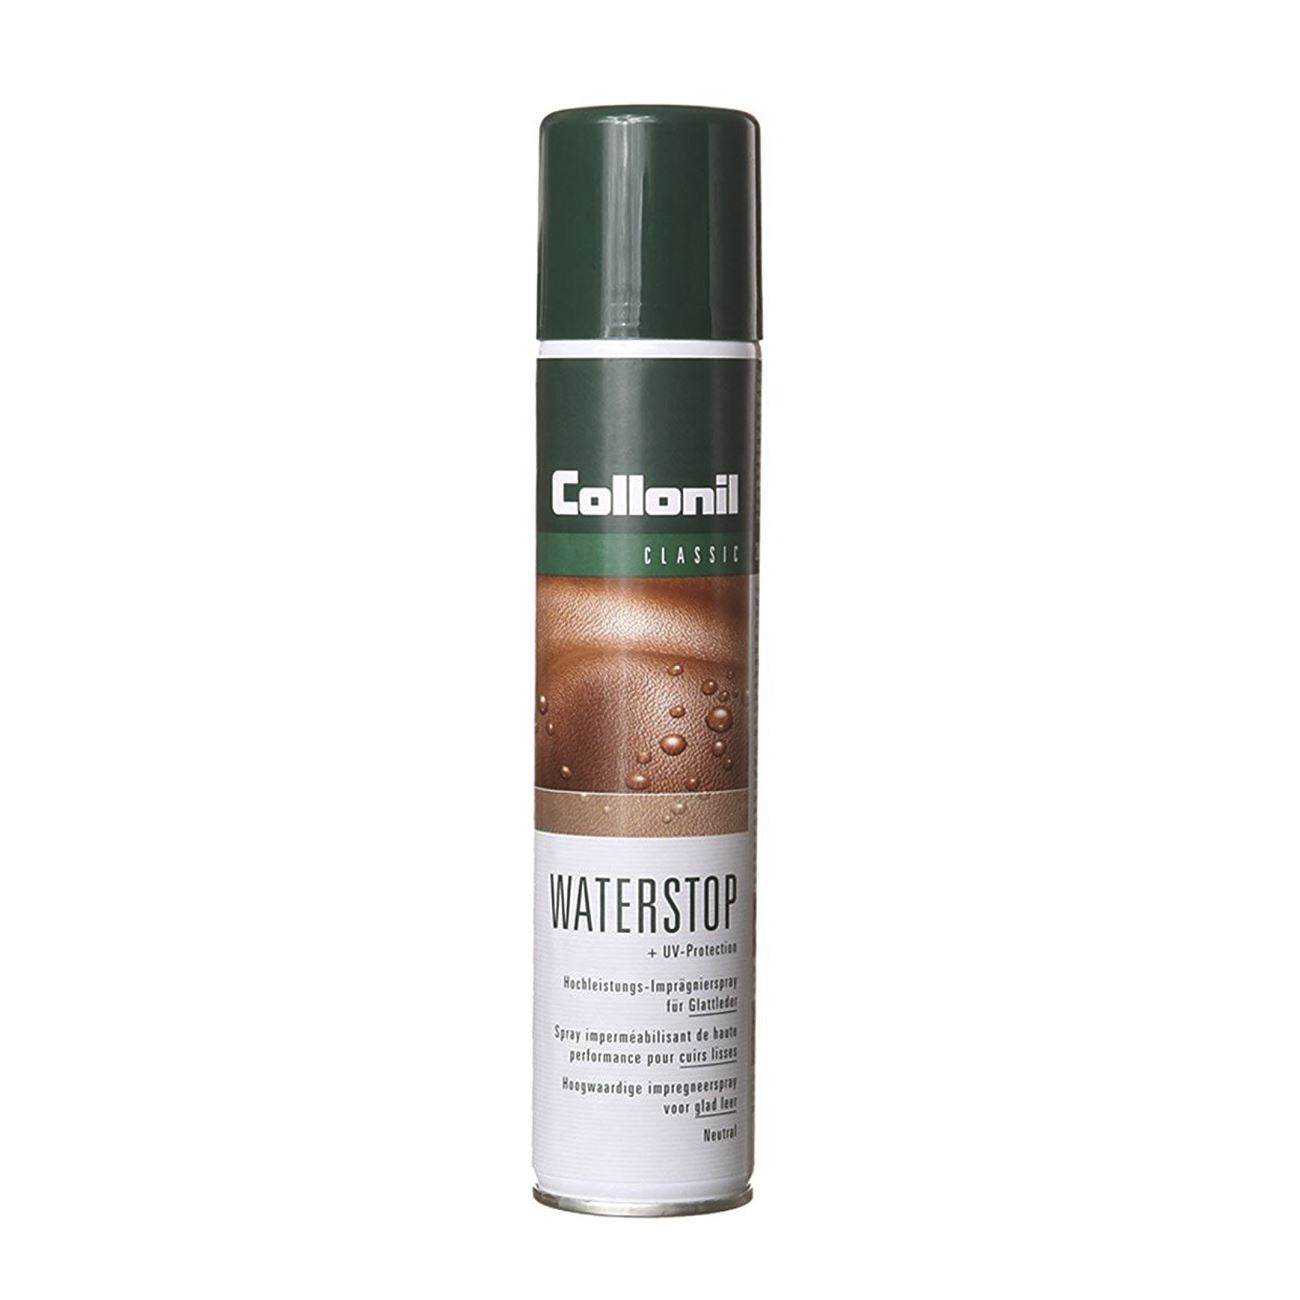 Collonil, Waterstop + UV spray, all materials Shoe Care Products Collonil Shoe care 